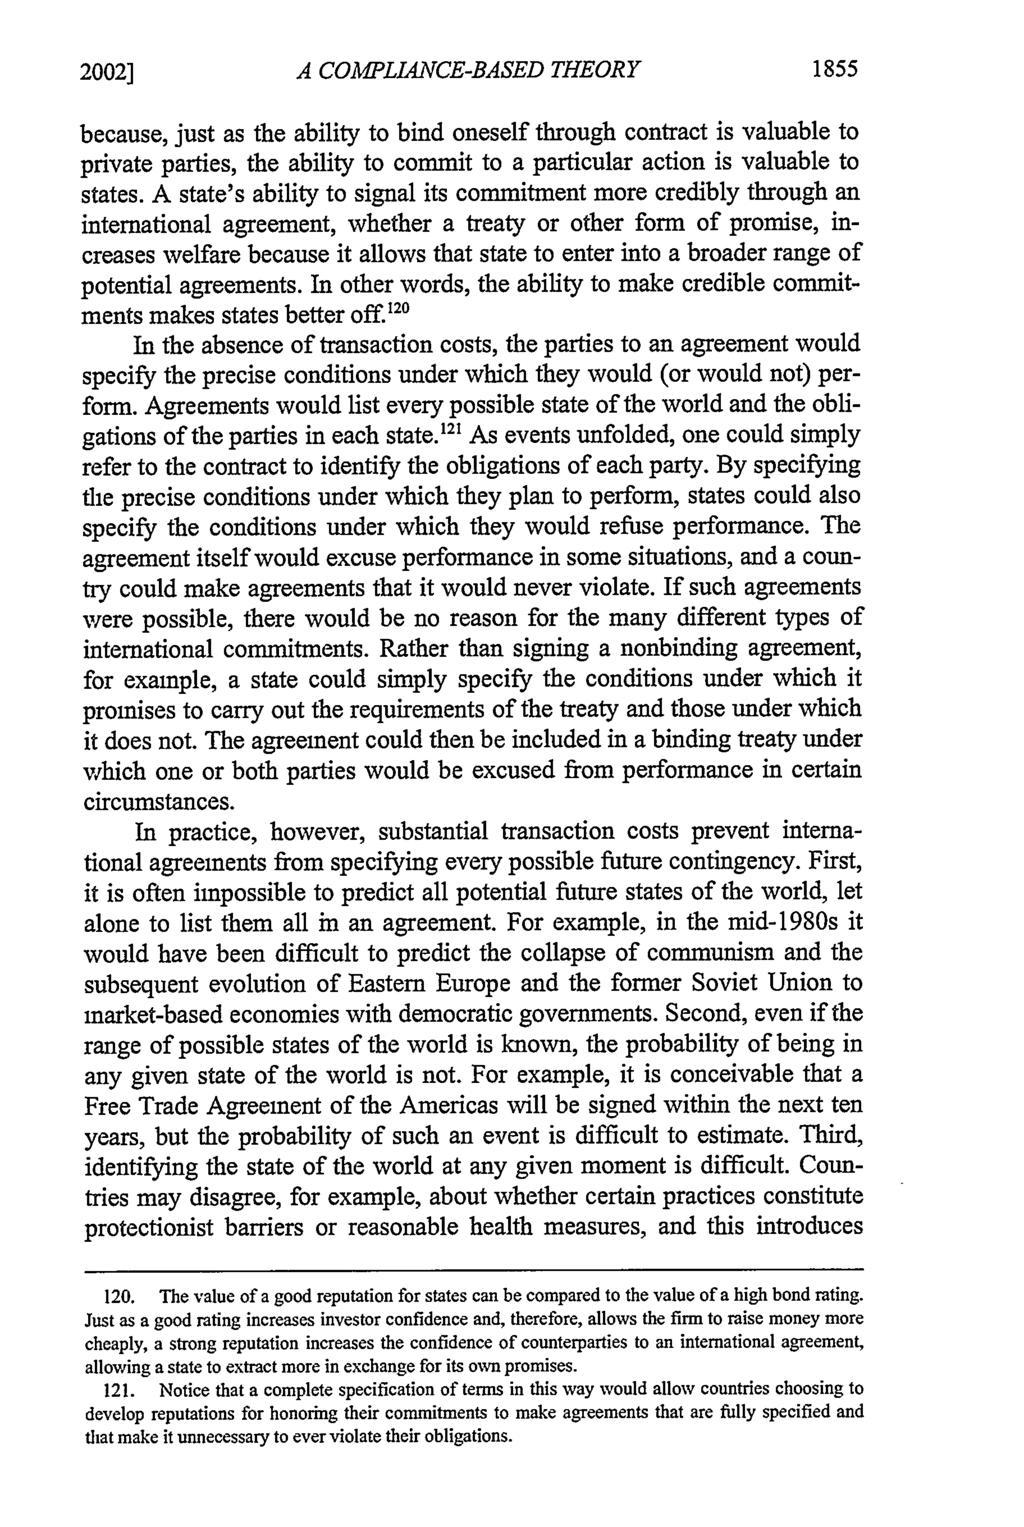 2002] A COMPLIANCE-BASED THEORY 1855 because, just as the ability to bind oneself through contract is valuable to private parties, the ability to commit to a particular action is valuable to states.